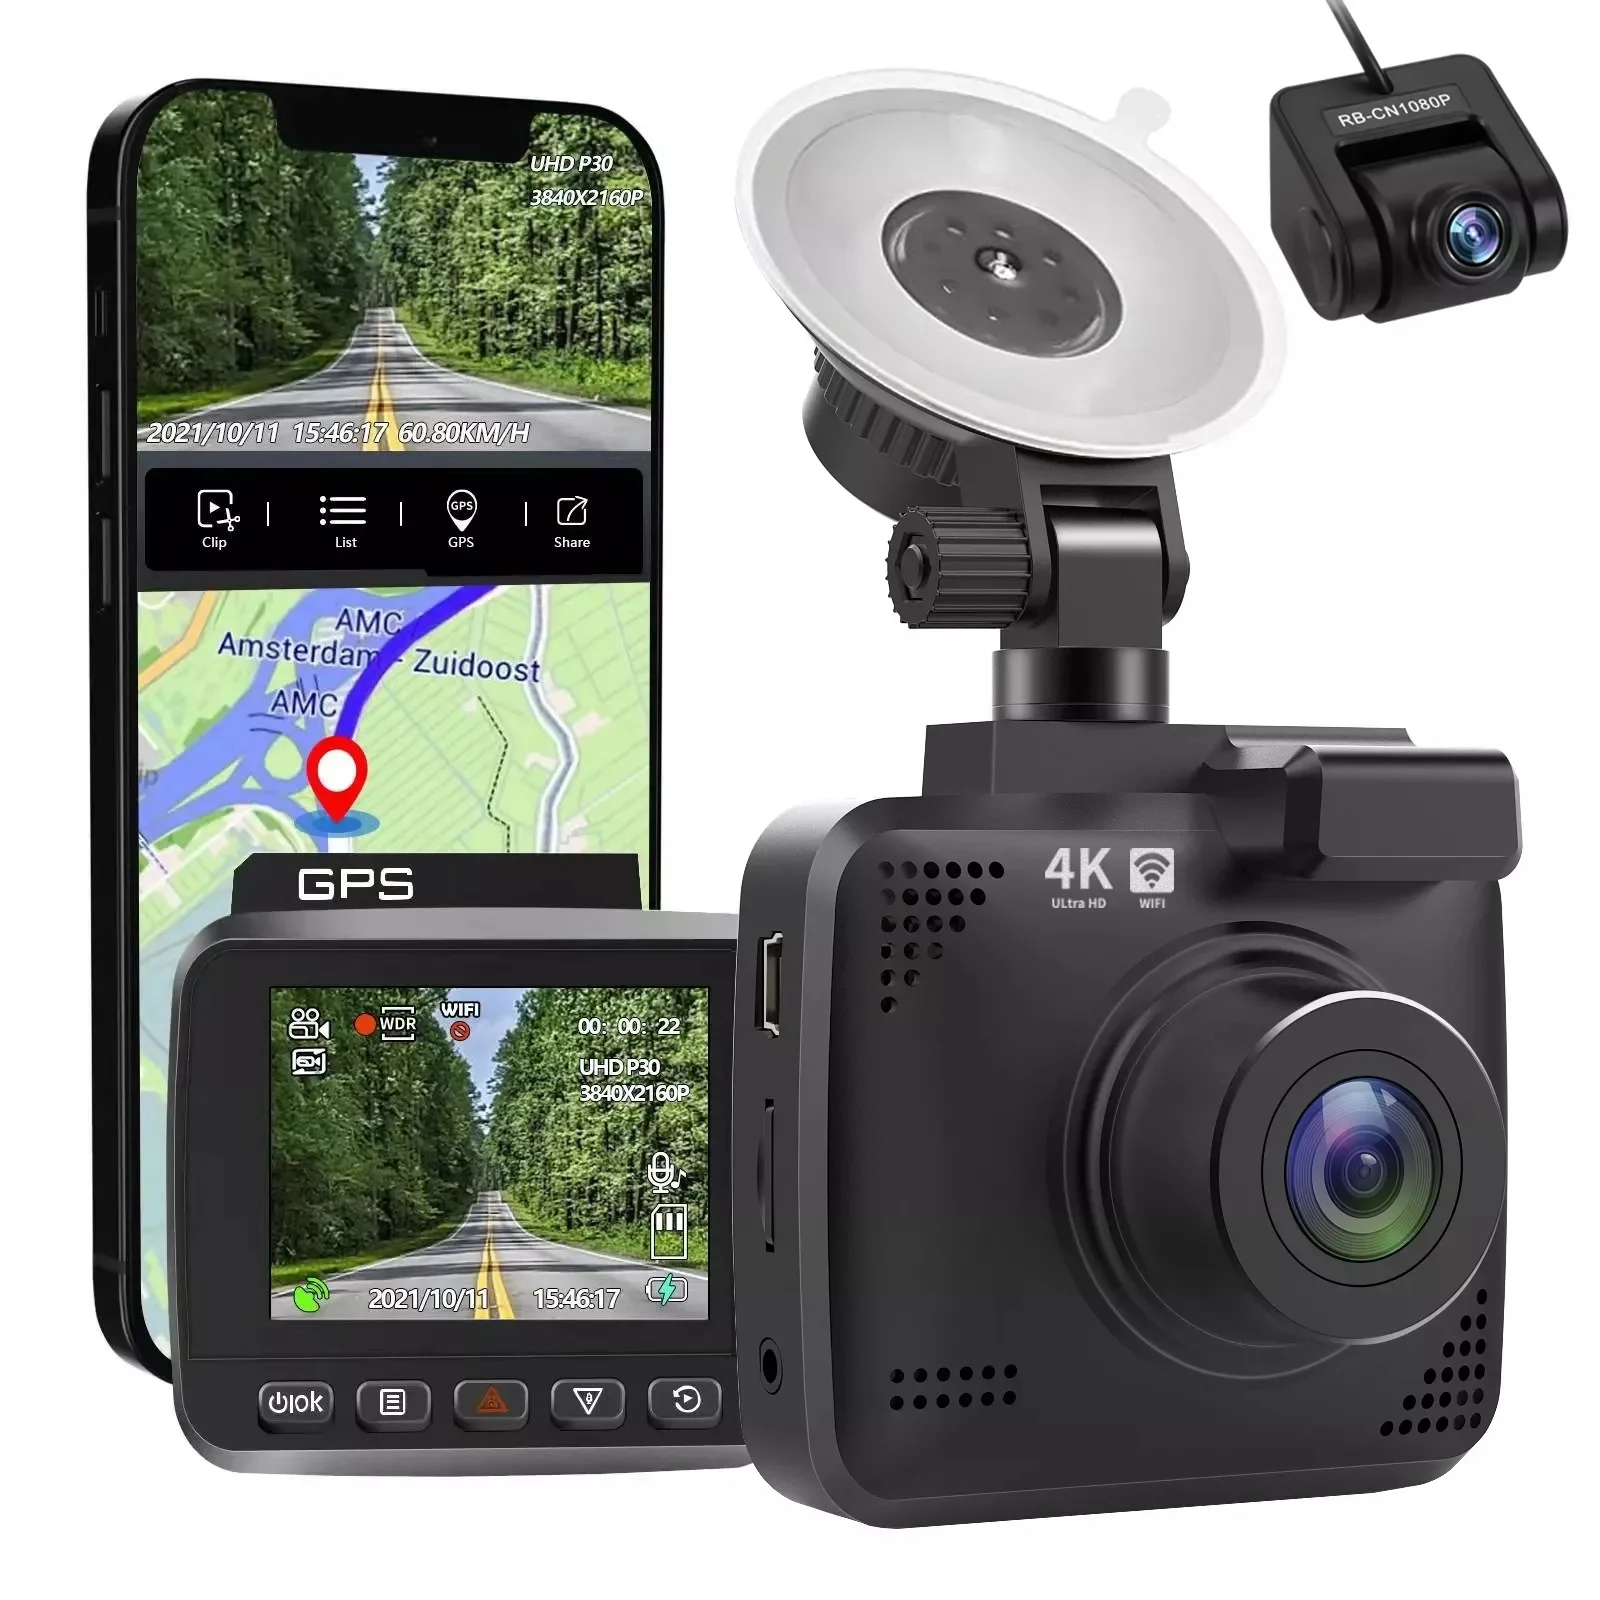 4K Dash Cam Built-in Wi-Fi UHD2160P Discreet Car Dashboard Camera Recorder  With 24-Hour Parking Monitor,, Loop Recording - Buy 4K Dash Cam Built-in  Wi-Fi UHD2160P Discreet Car Dashboard Camera Recorder With 24-Hour